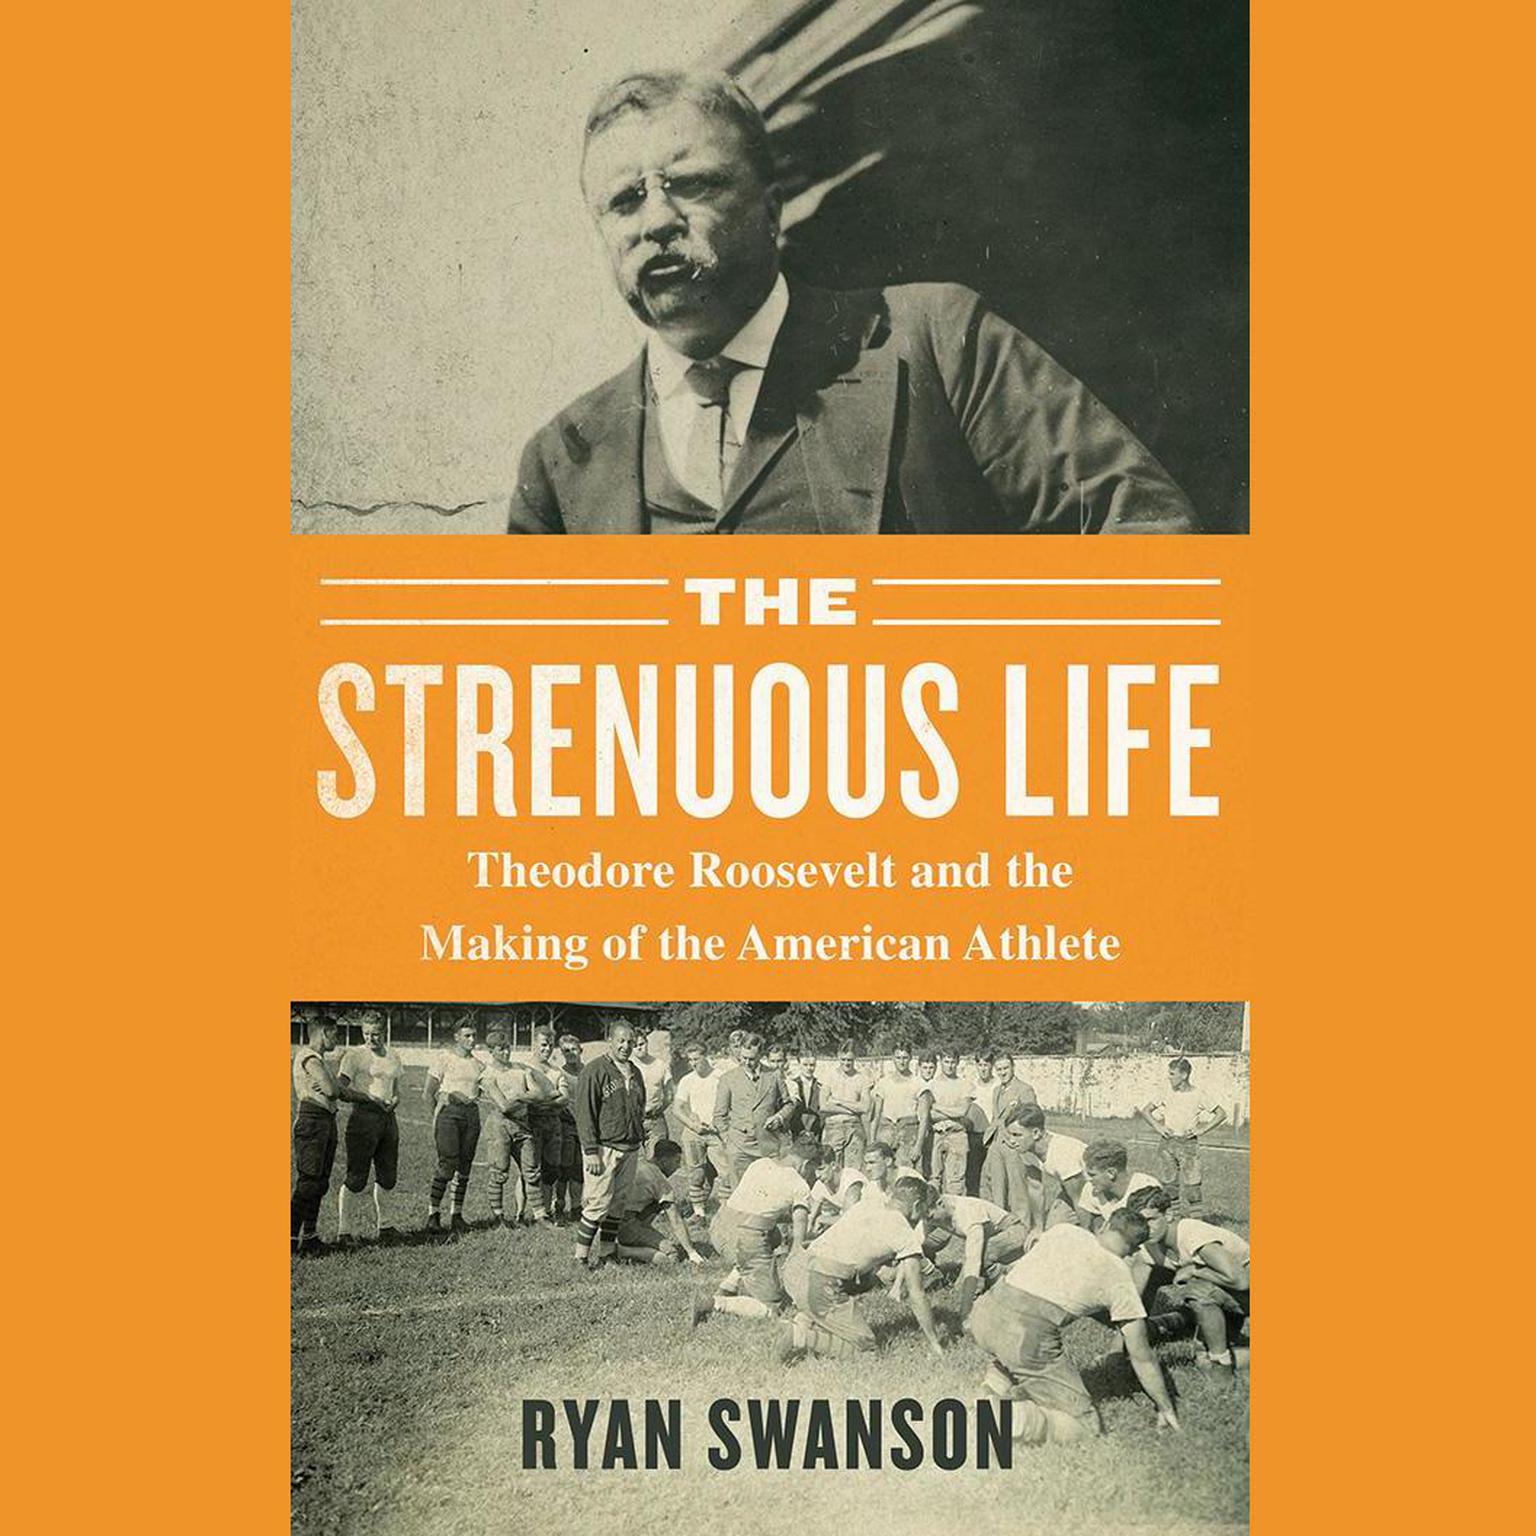 The Strenuous Life: Theodore Roosevelt and the Making of the American Athlete Audiobook, by Ryan Swanson